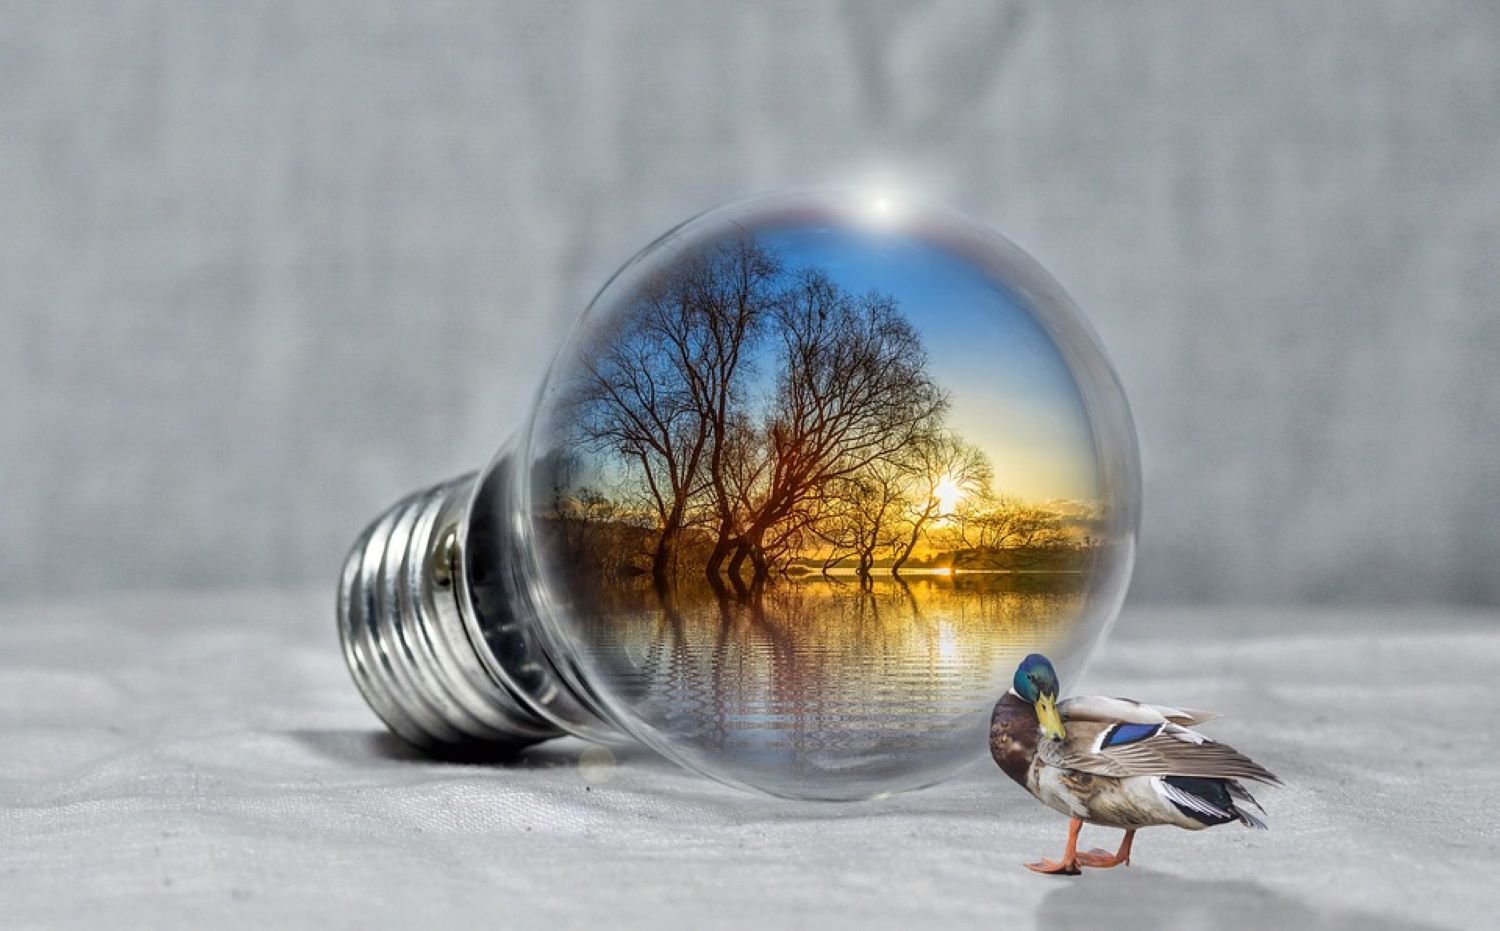 World reflection in a bulb